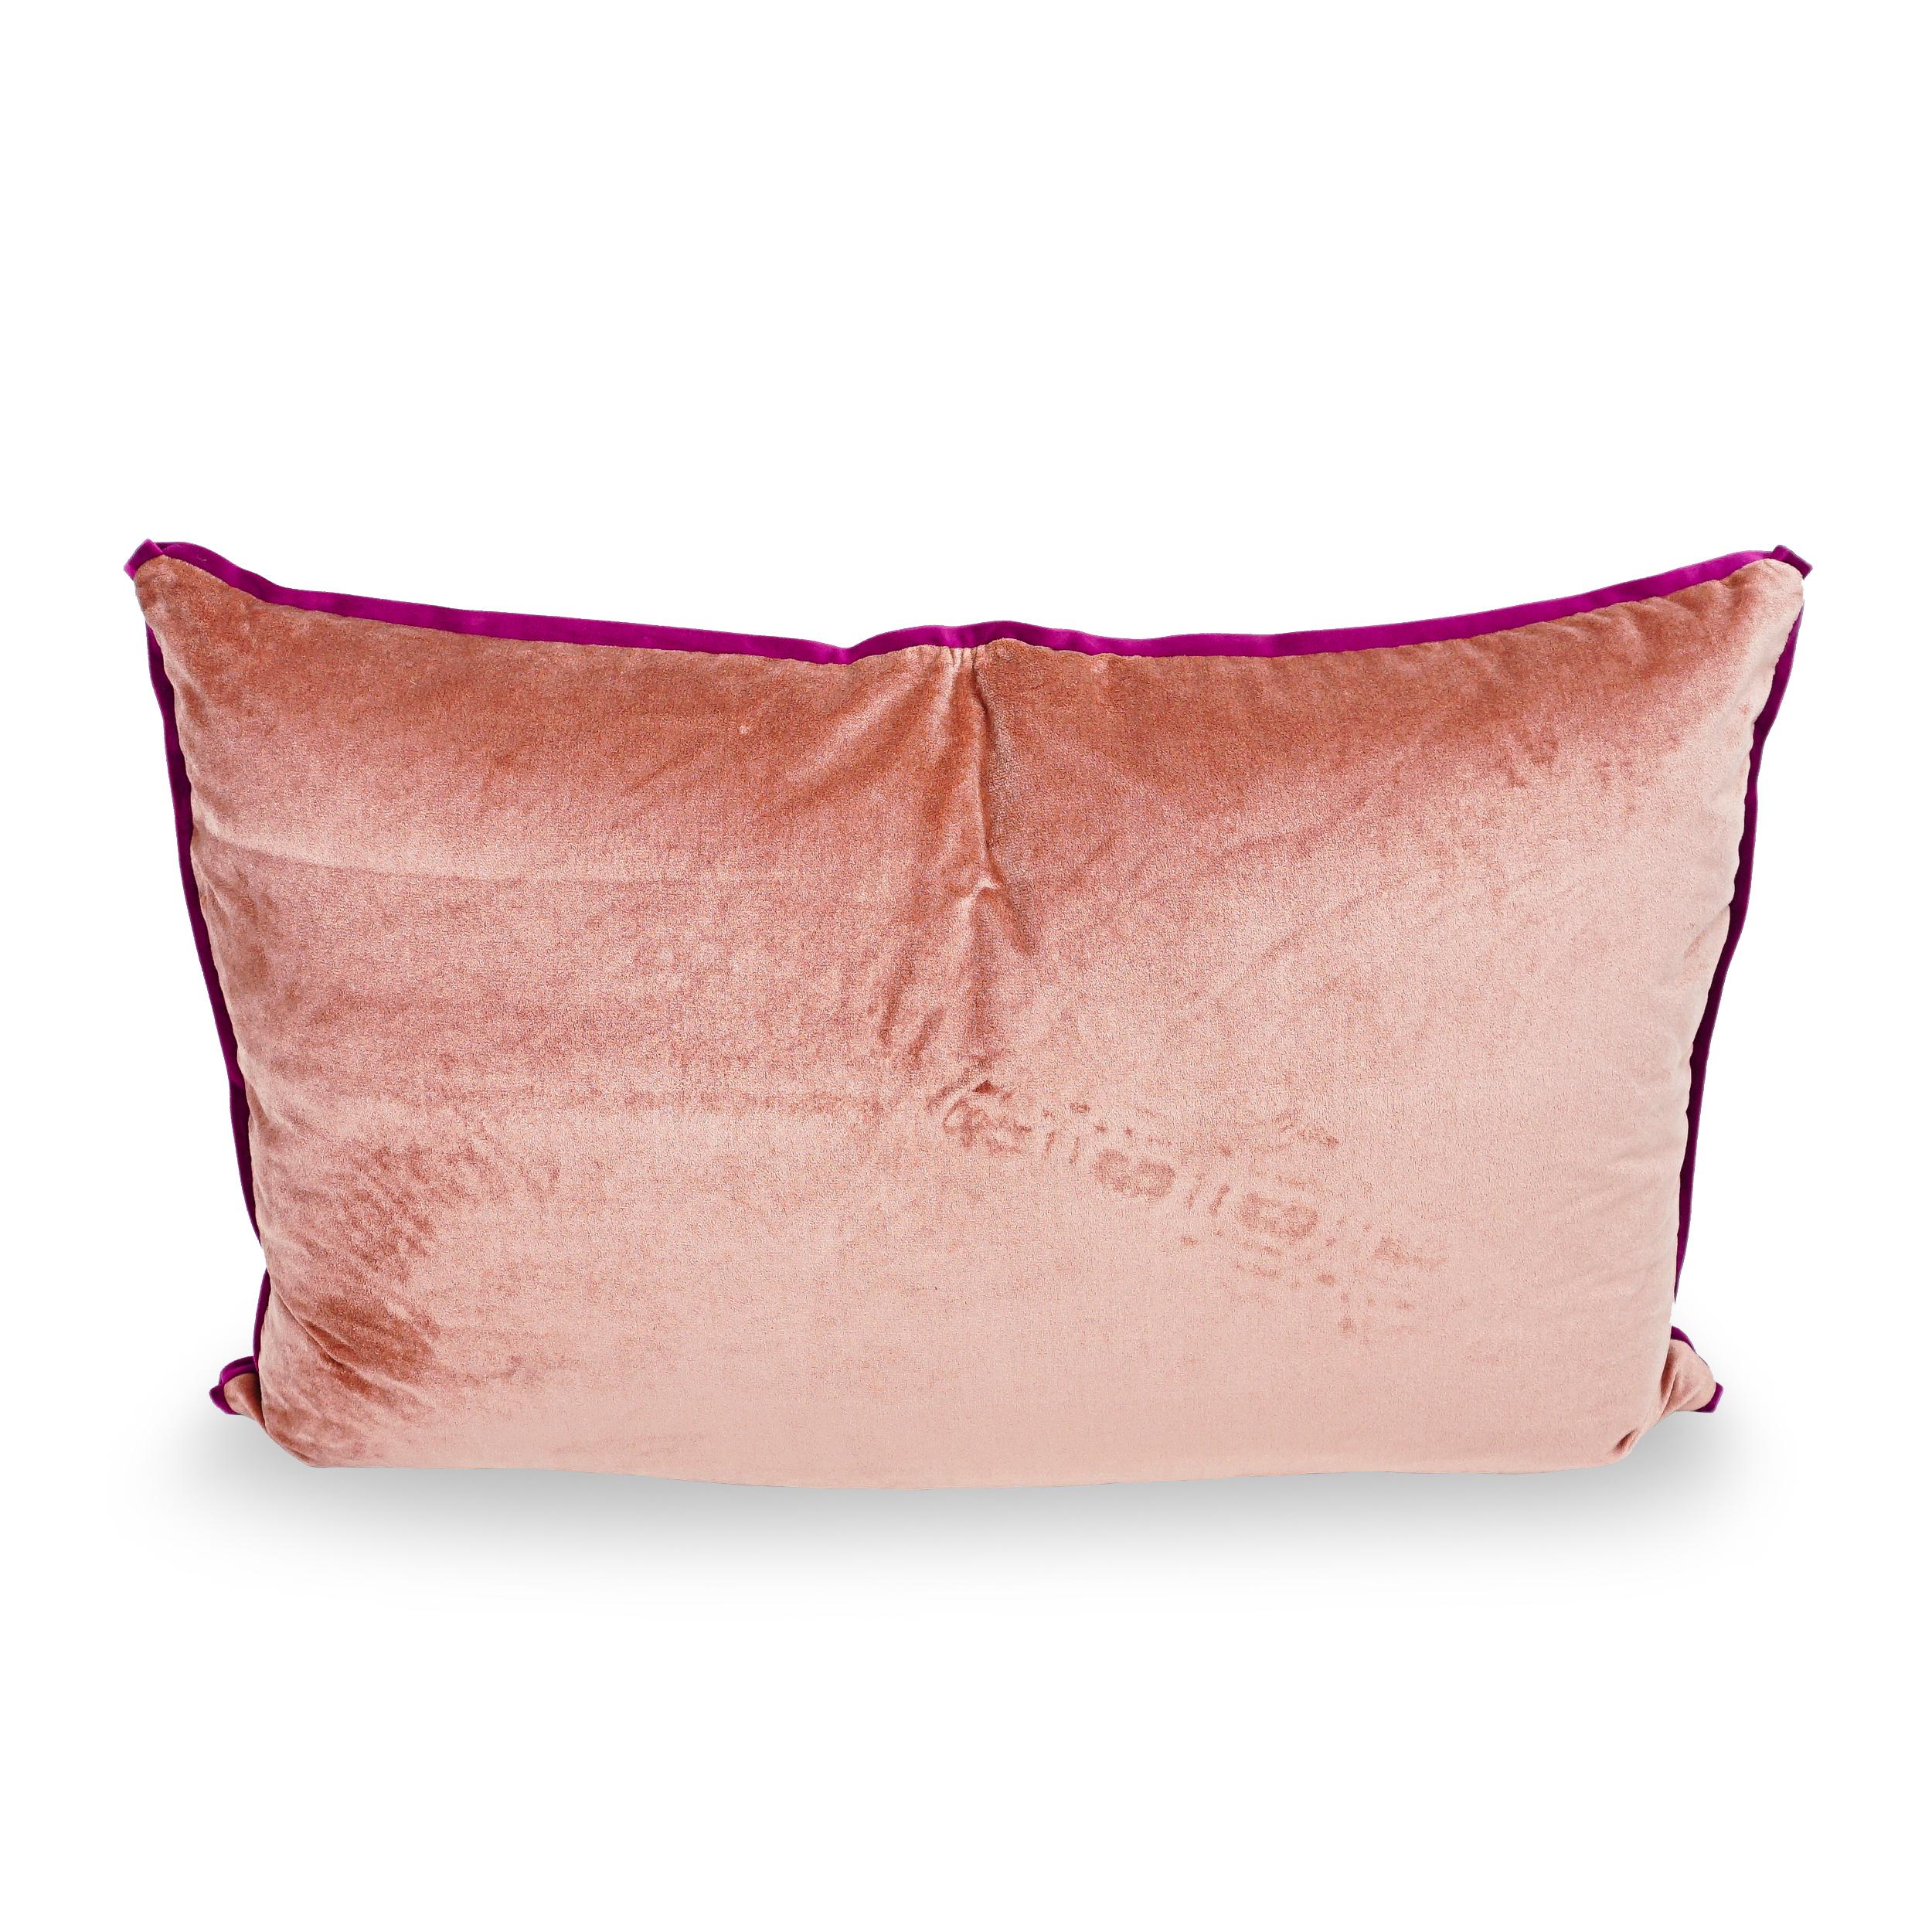 Exotic Playful Oversized Pillow with Elephant Camel Printed Cotton & Pink Velvet For Sale 3